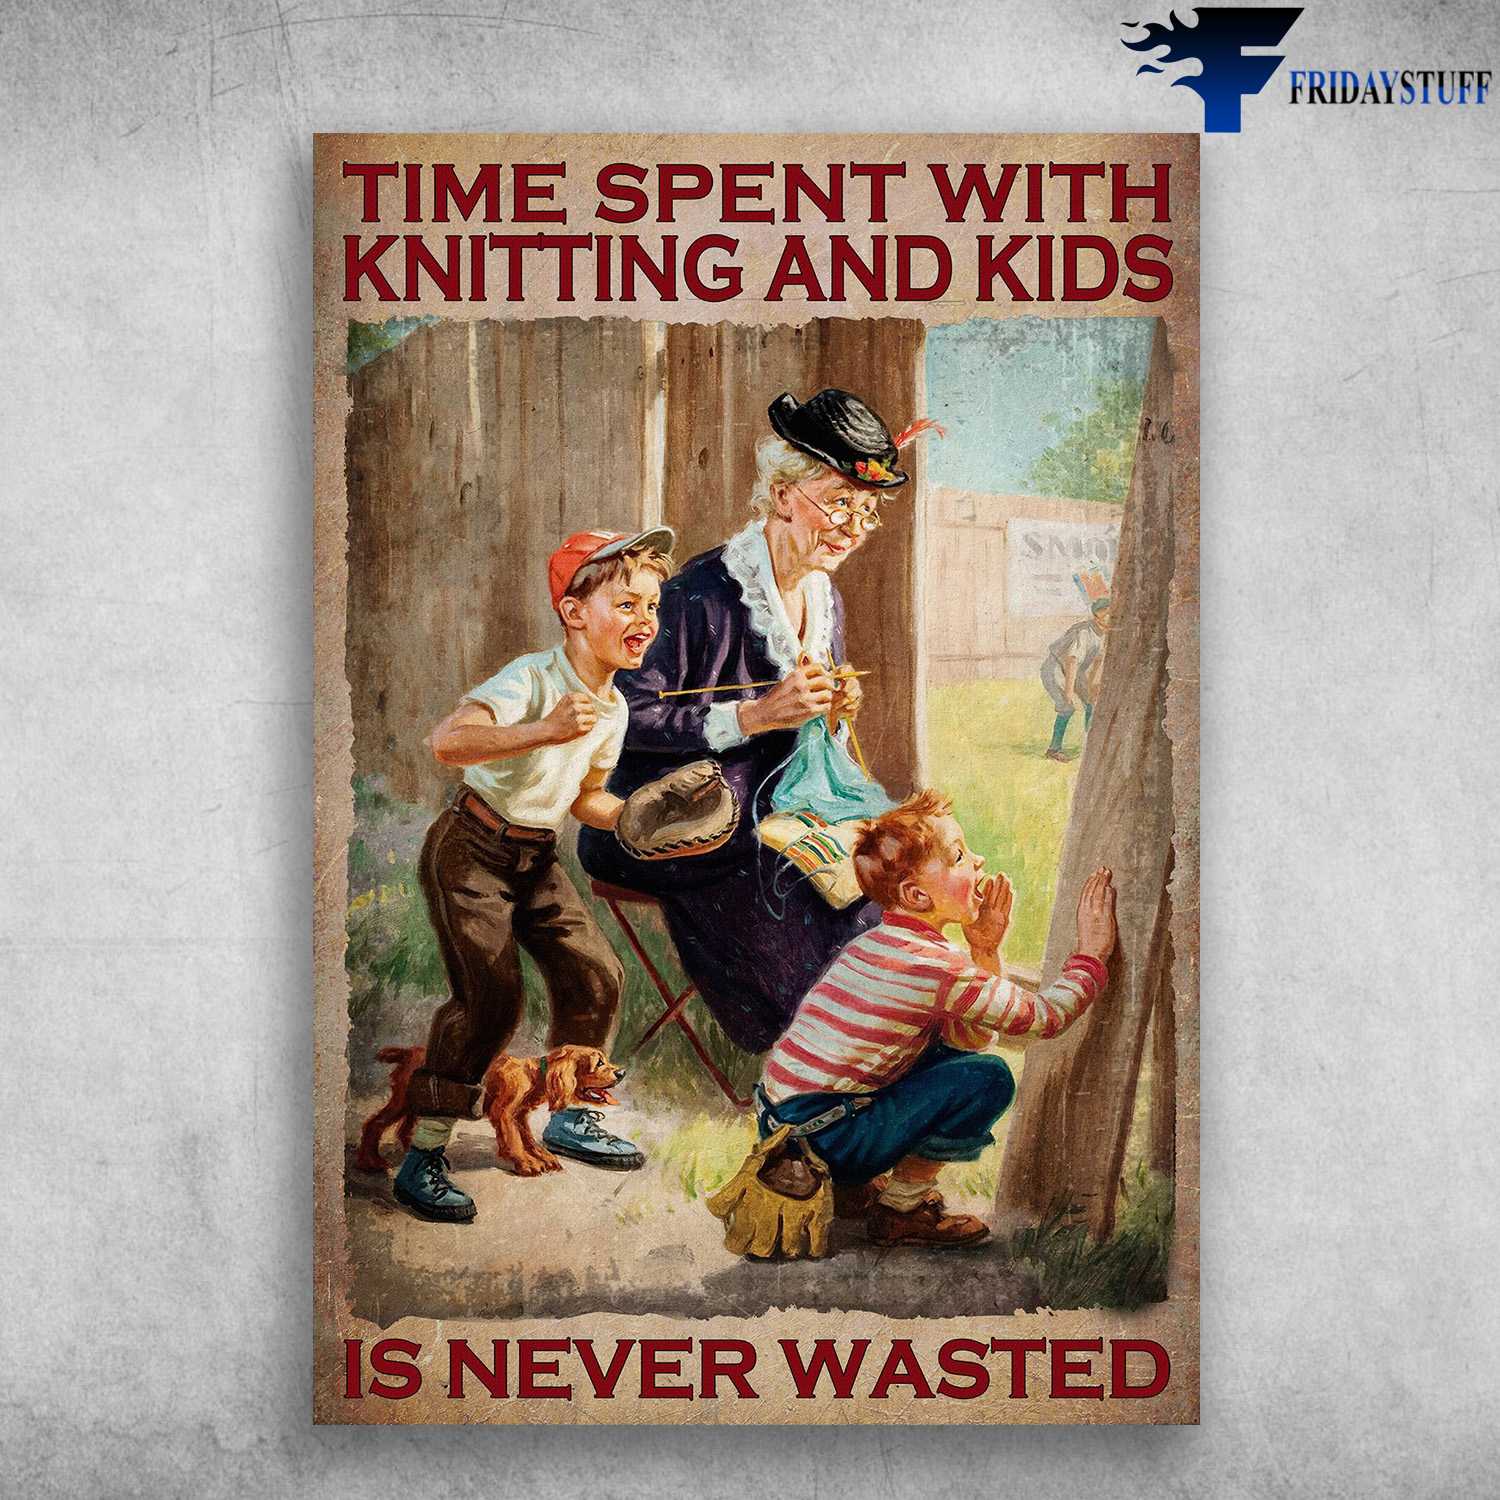 Old Woman, Knitting And Kids - Time Spent With Knitting And Kids, Is Never Wasted